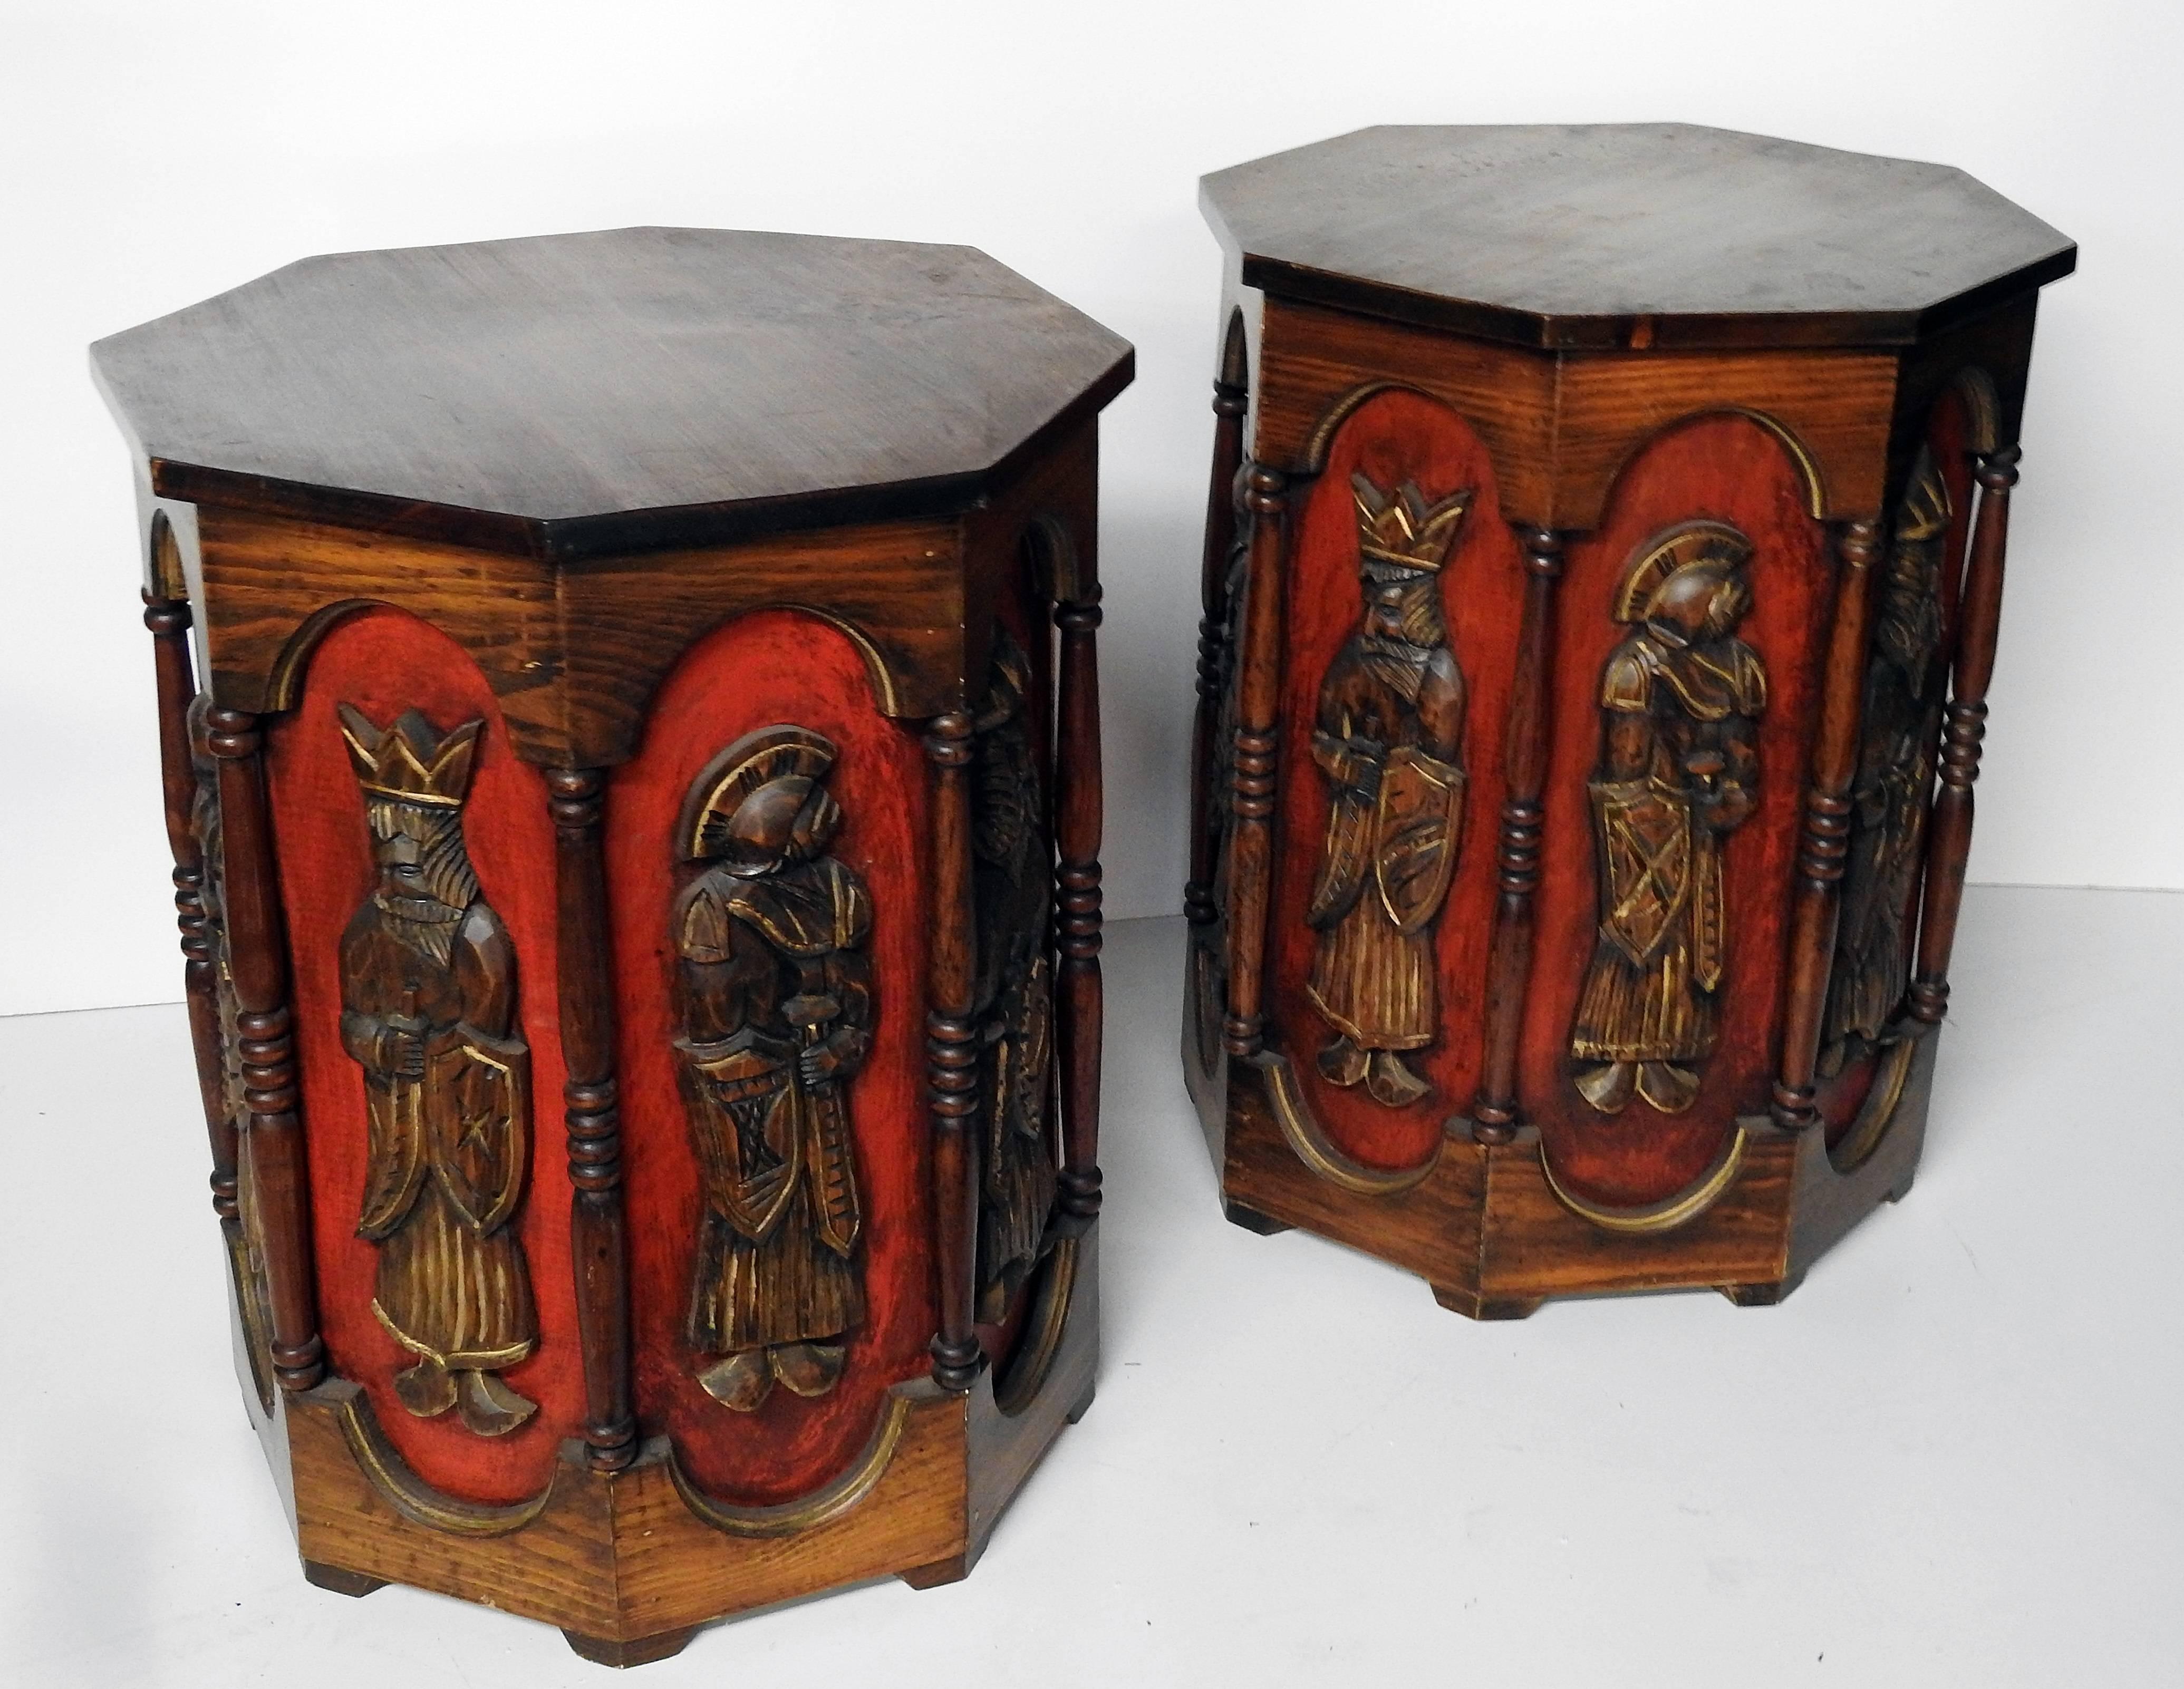 Unusual pair of Mid-Century Modern side tables with carved warriors on the sides, attributed to Witco.